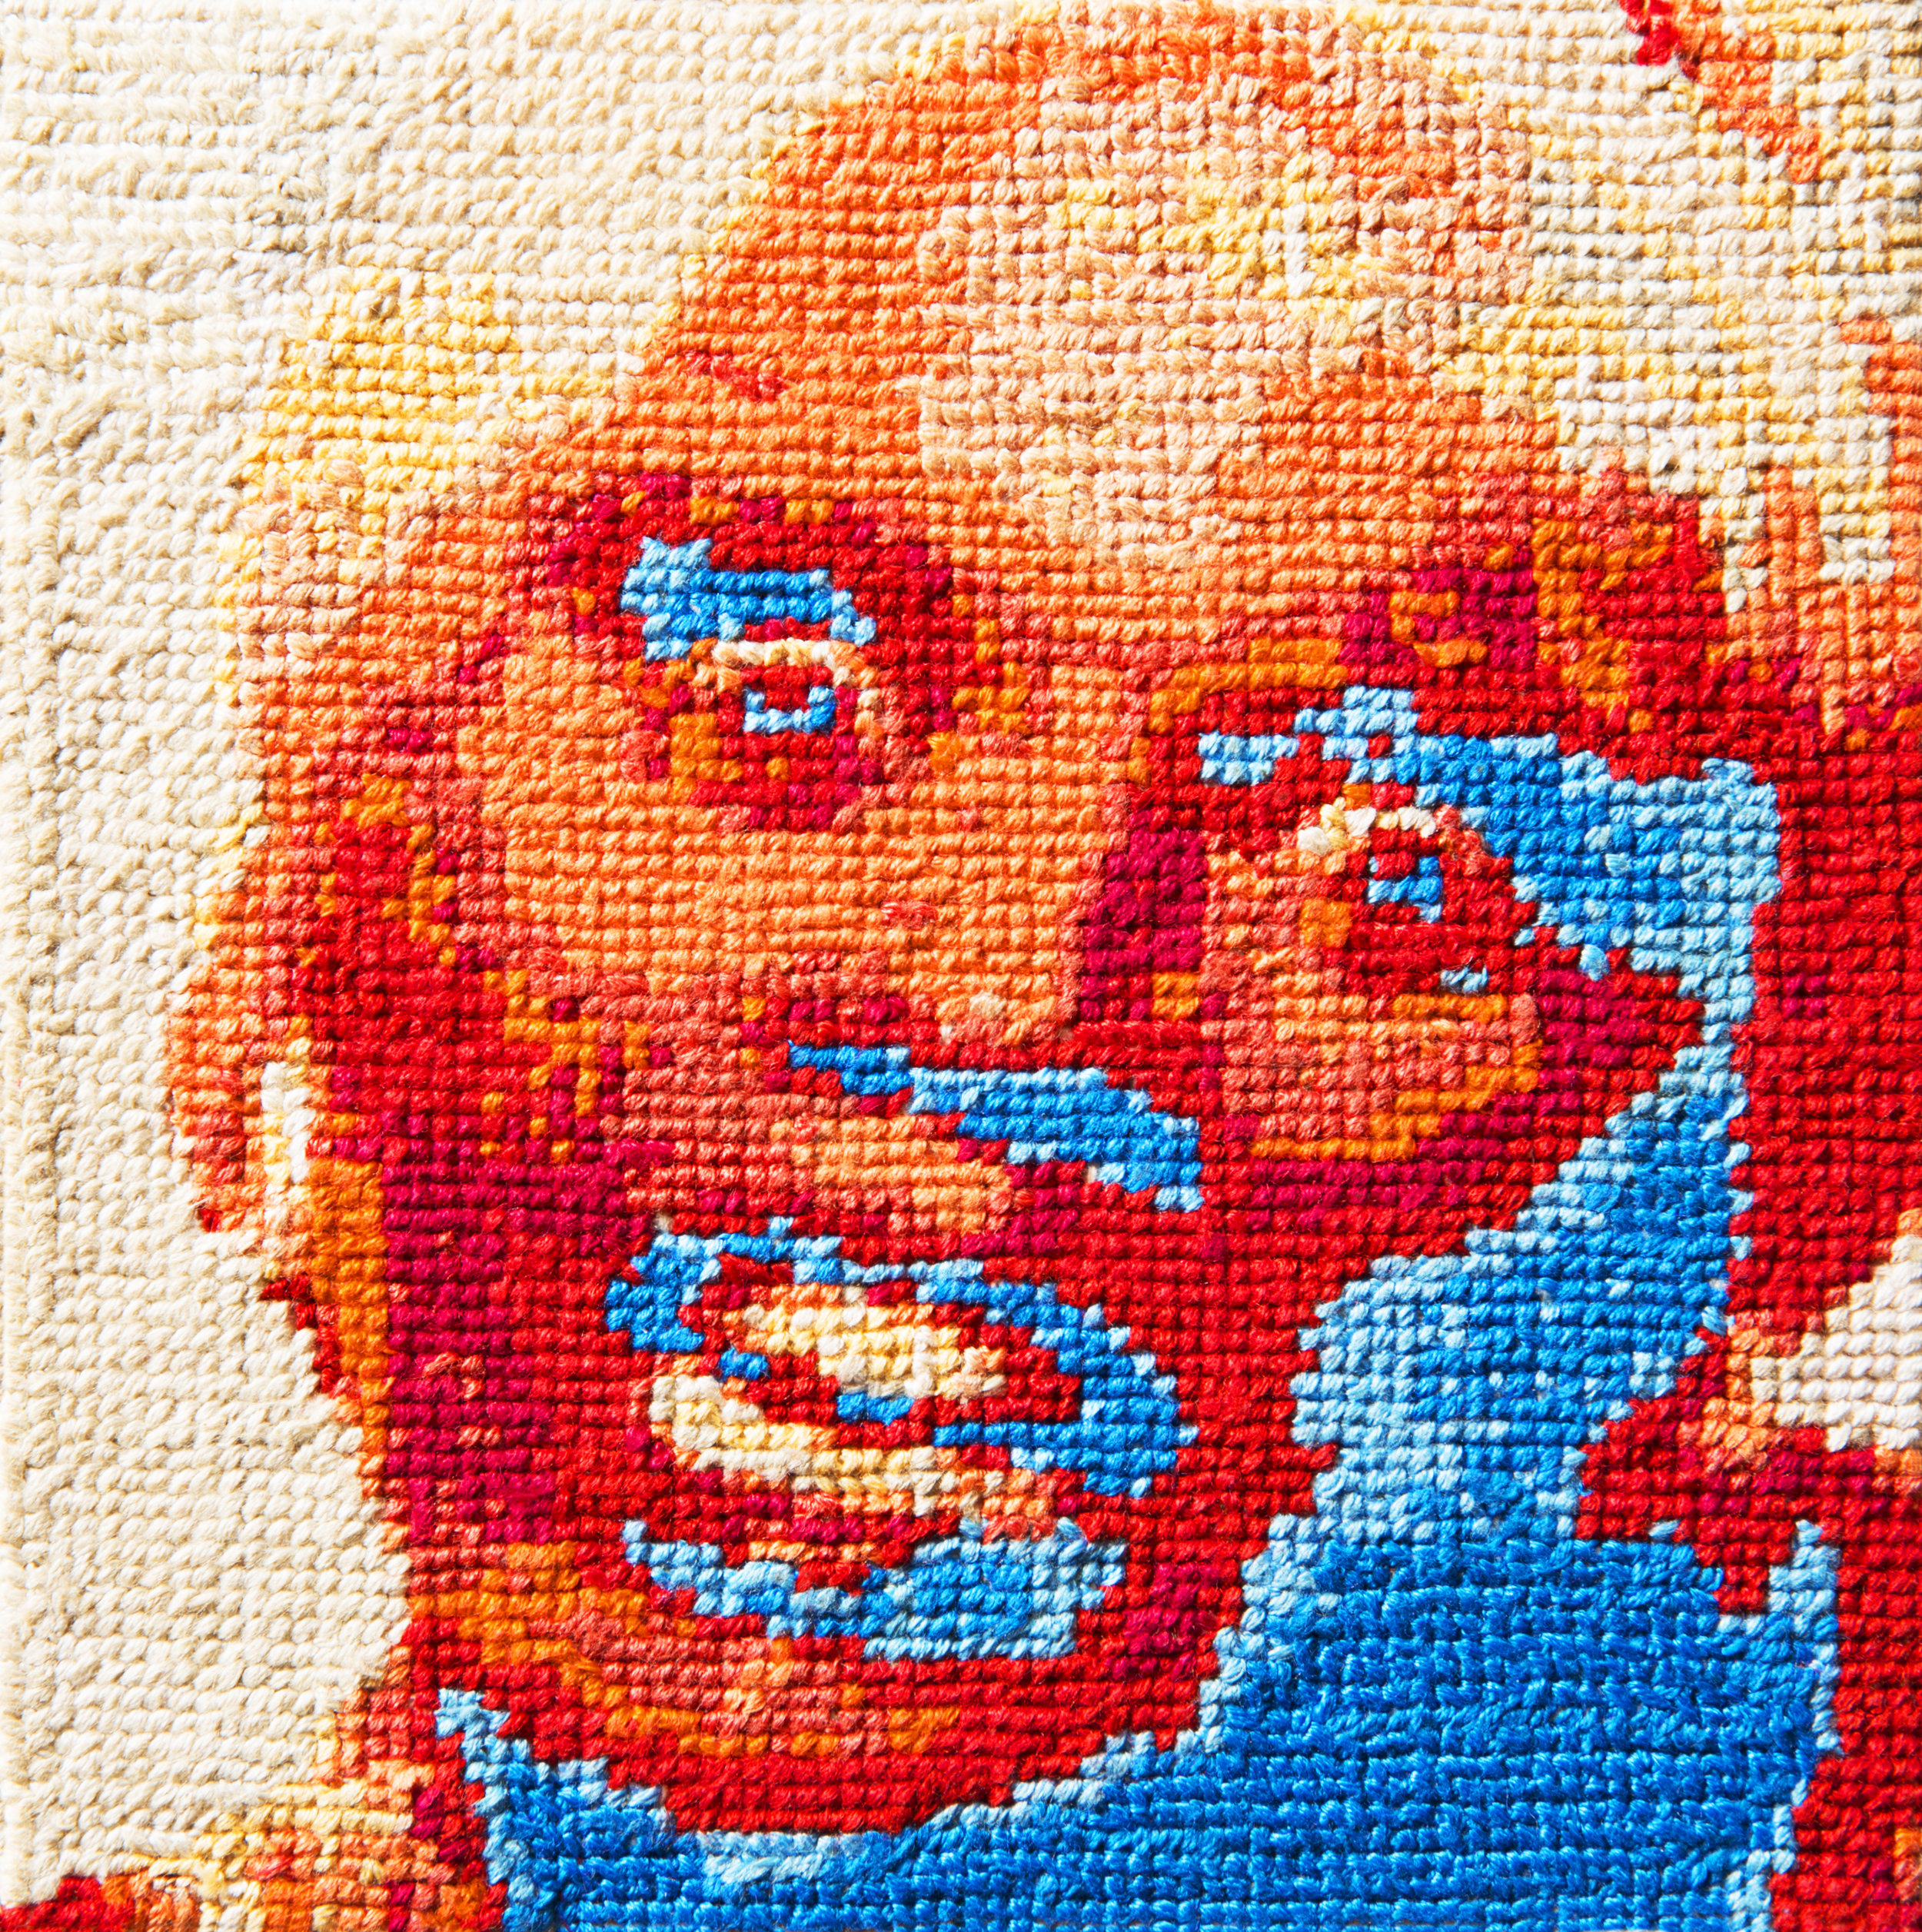   Frame 30   By Mike Stasny  5 x 5 inches  Cotton thread on aida cloth  2013 